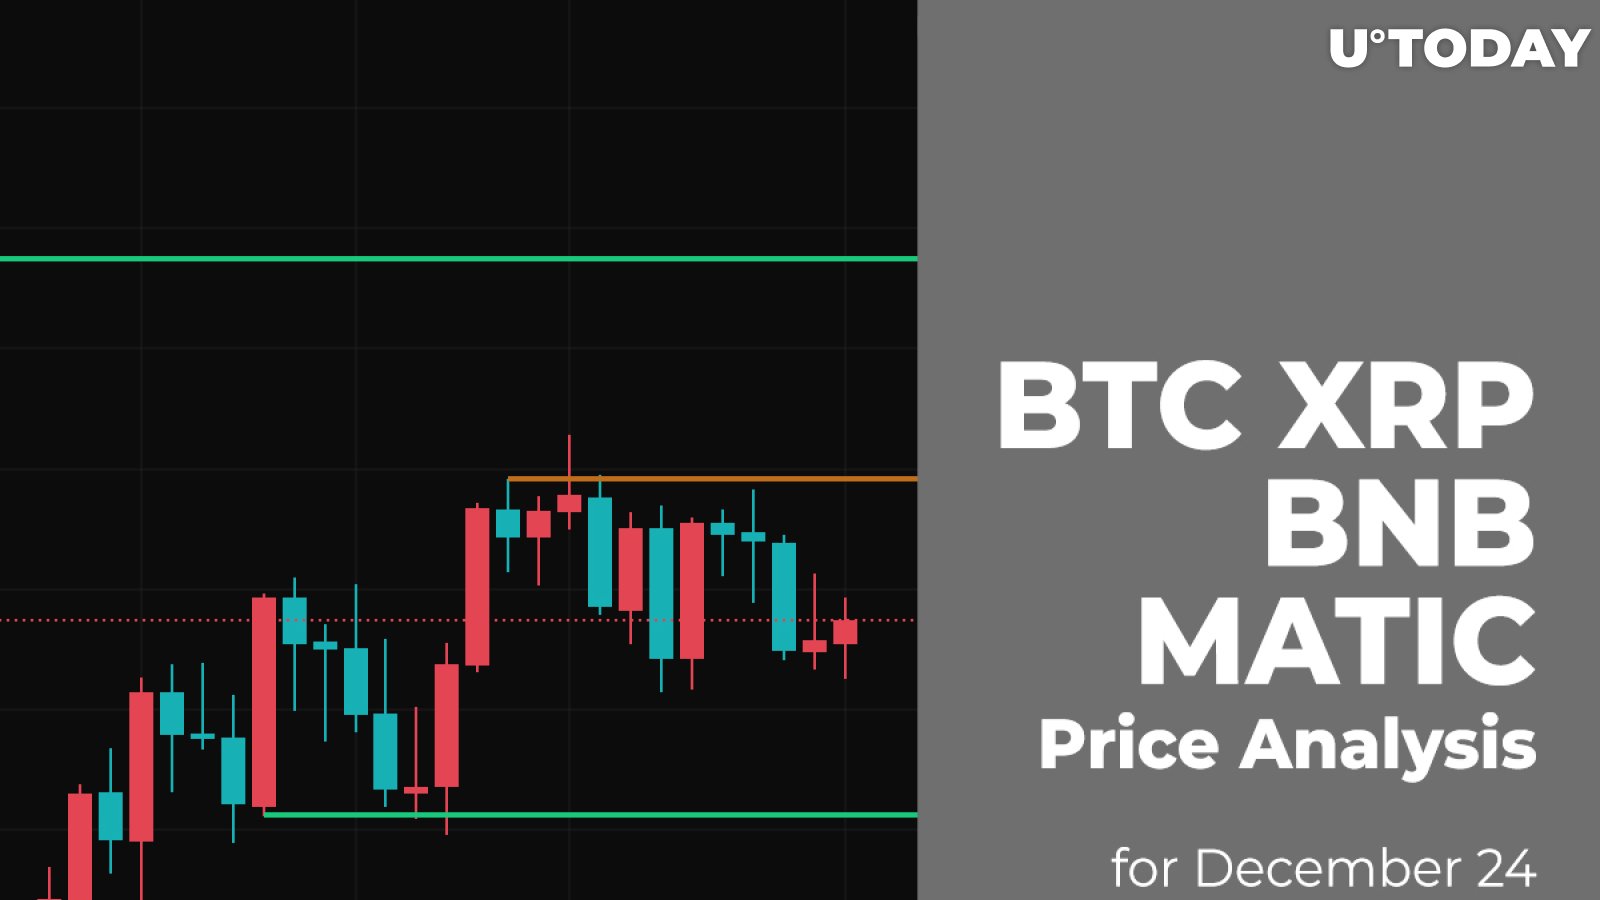 BTC, XRP, BNB and MATIC Price Analysis for December 24